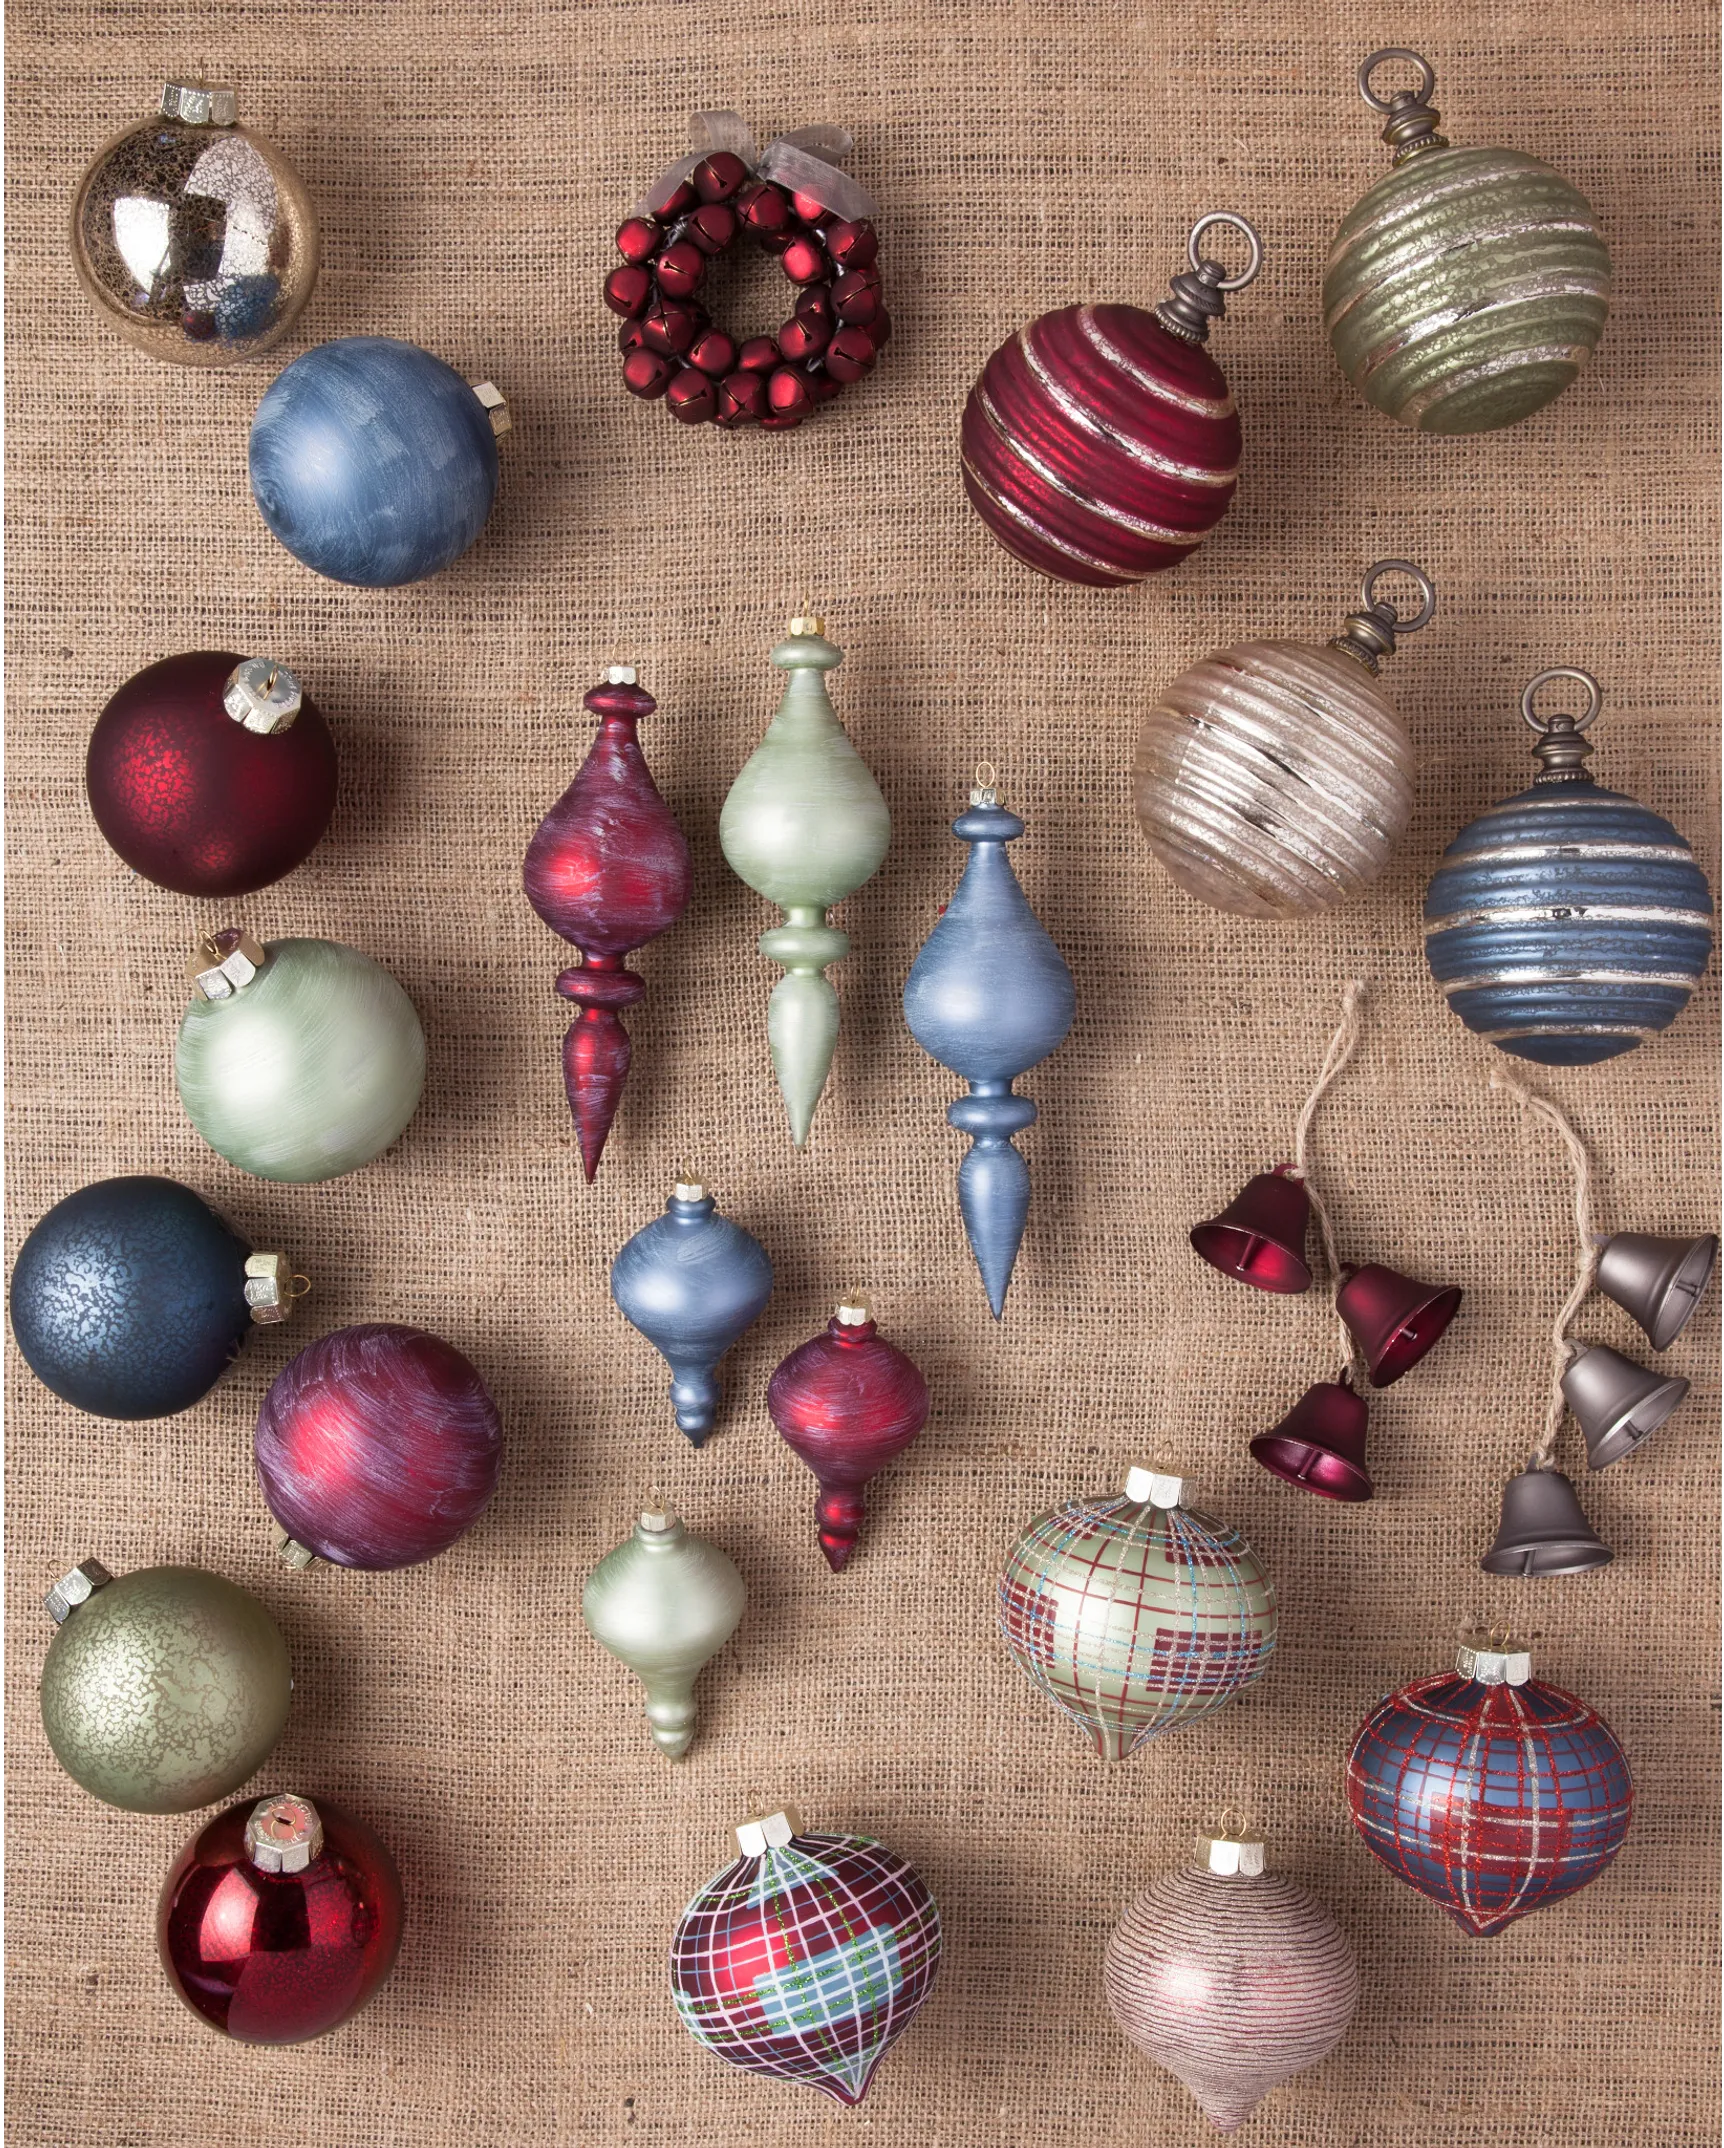 Red Tiny Christmas Ornaments In Assorted Styles Set of 25 Pcs